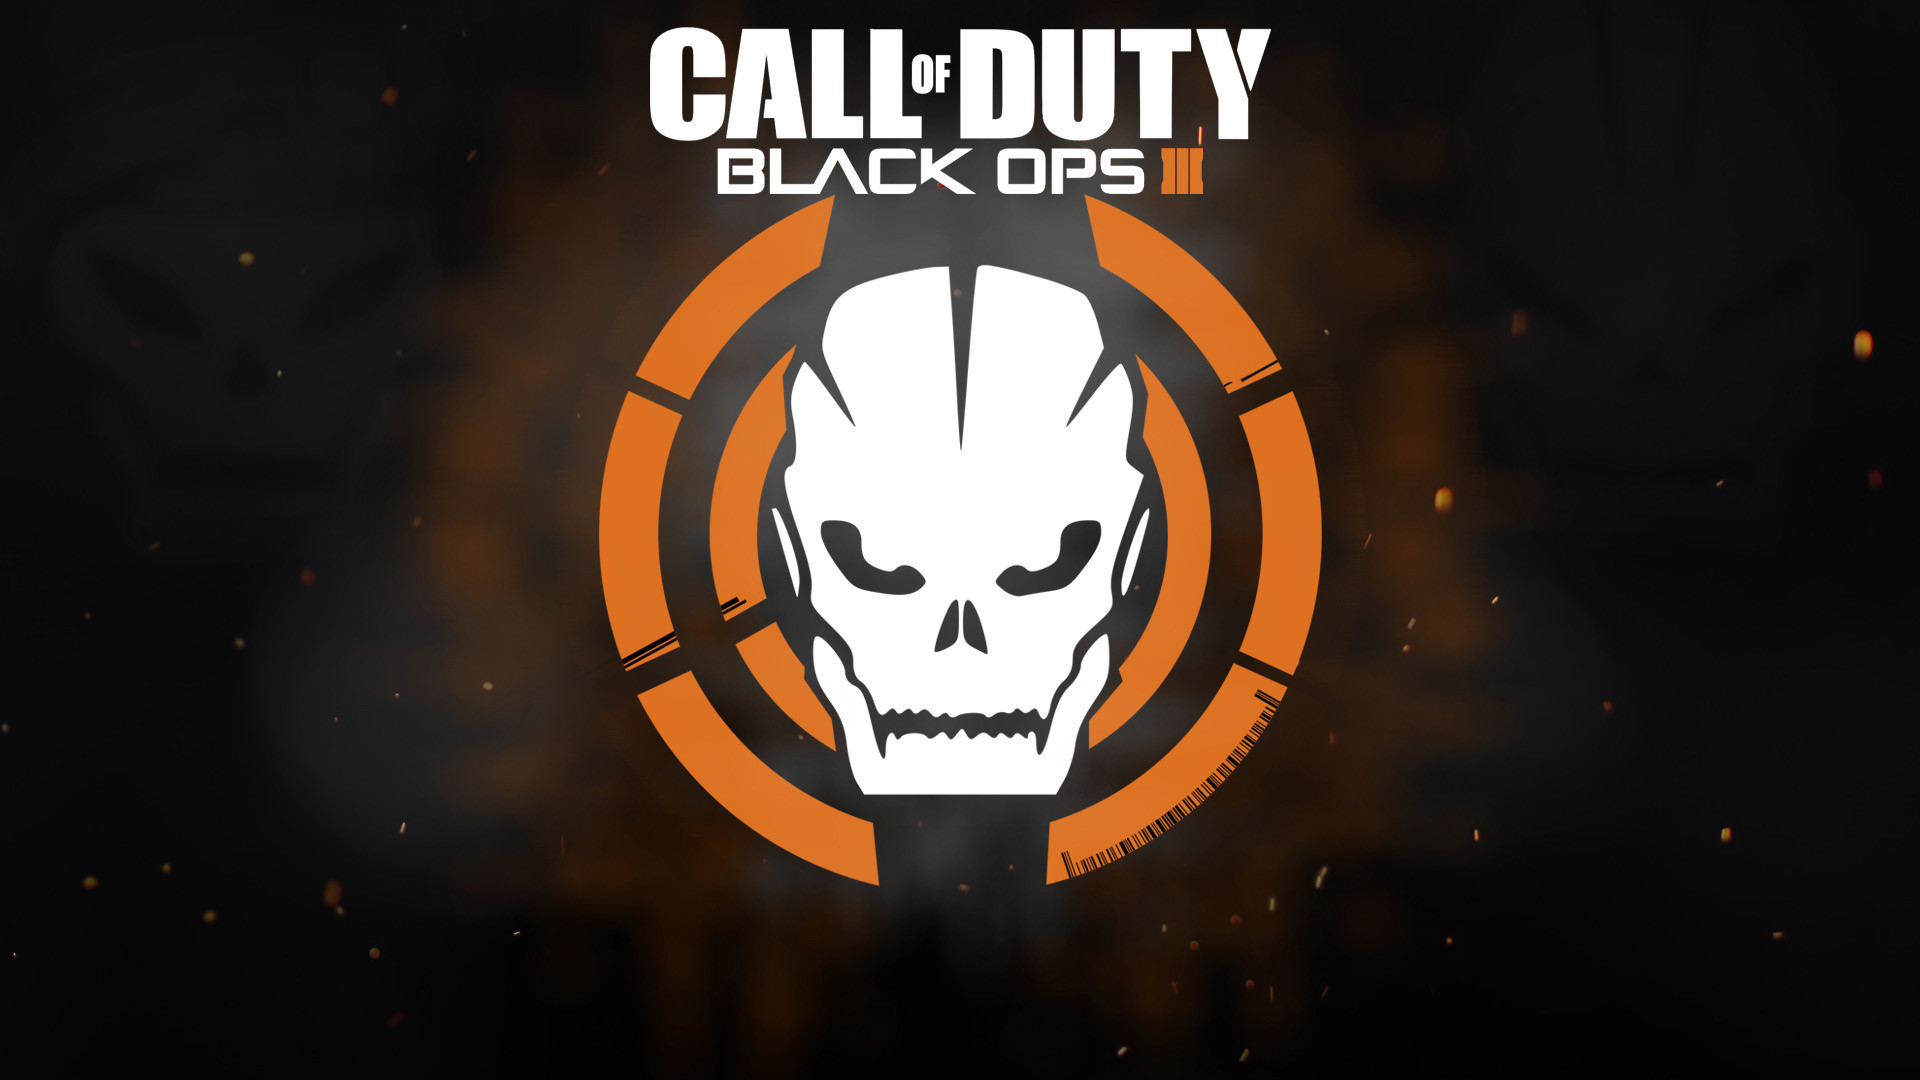 1920x1080 Call of Duty Black Ops 3 Redwood Free For All Gameplay Of The Best Shooting  Game Of Call Of Duty Series.Other related topics are Call of Duty Black Ops  3 ...